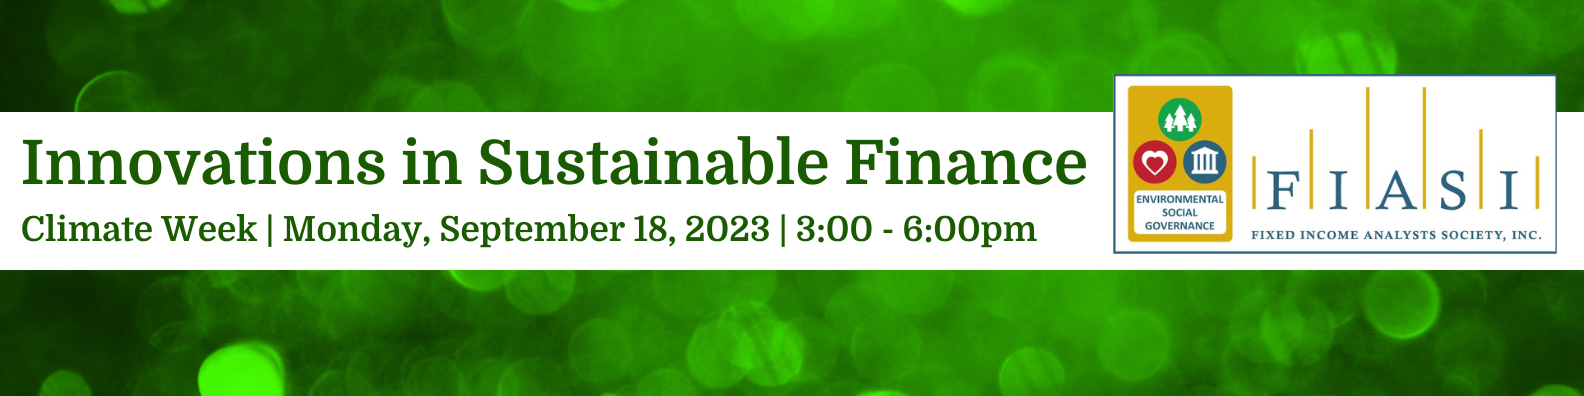 Innovations in Sustainable Finance